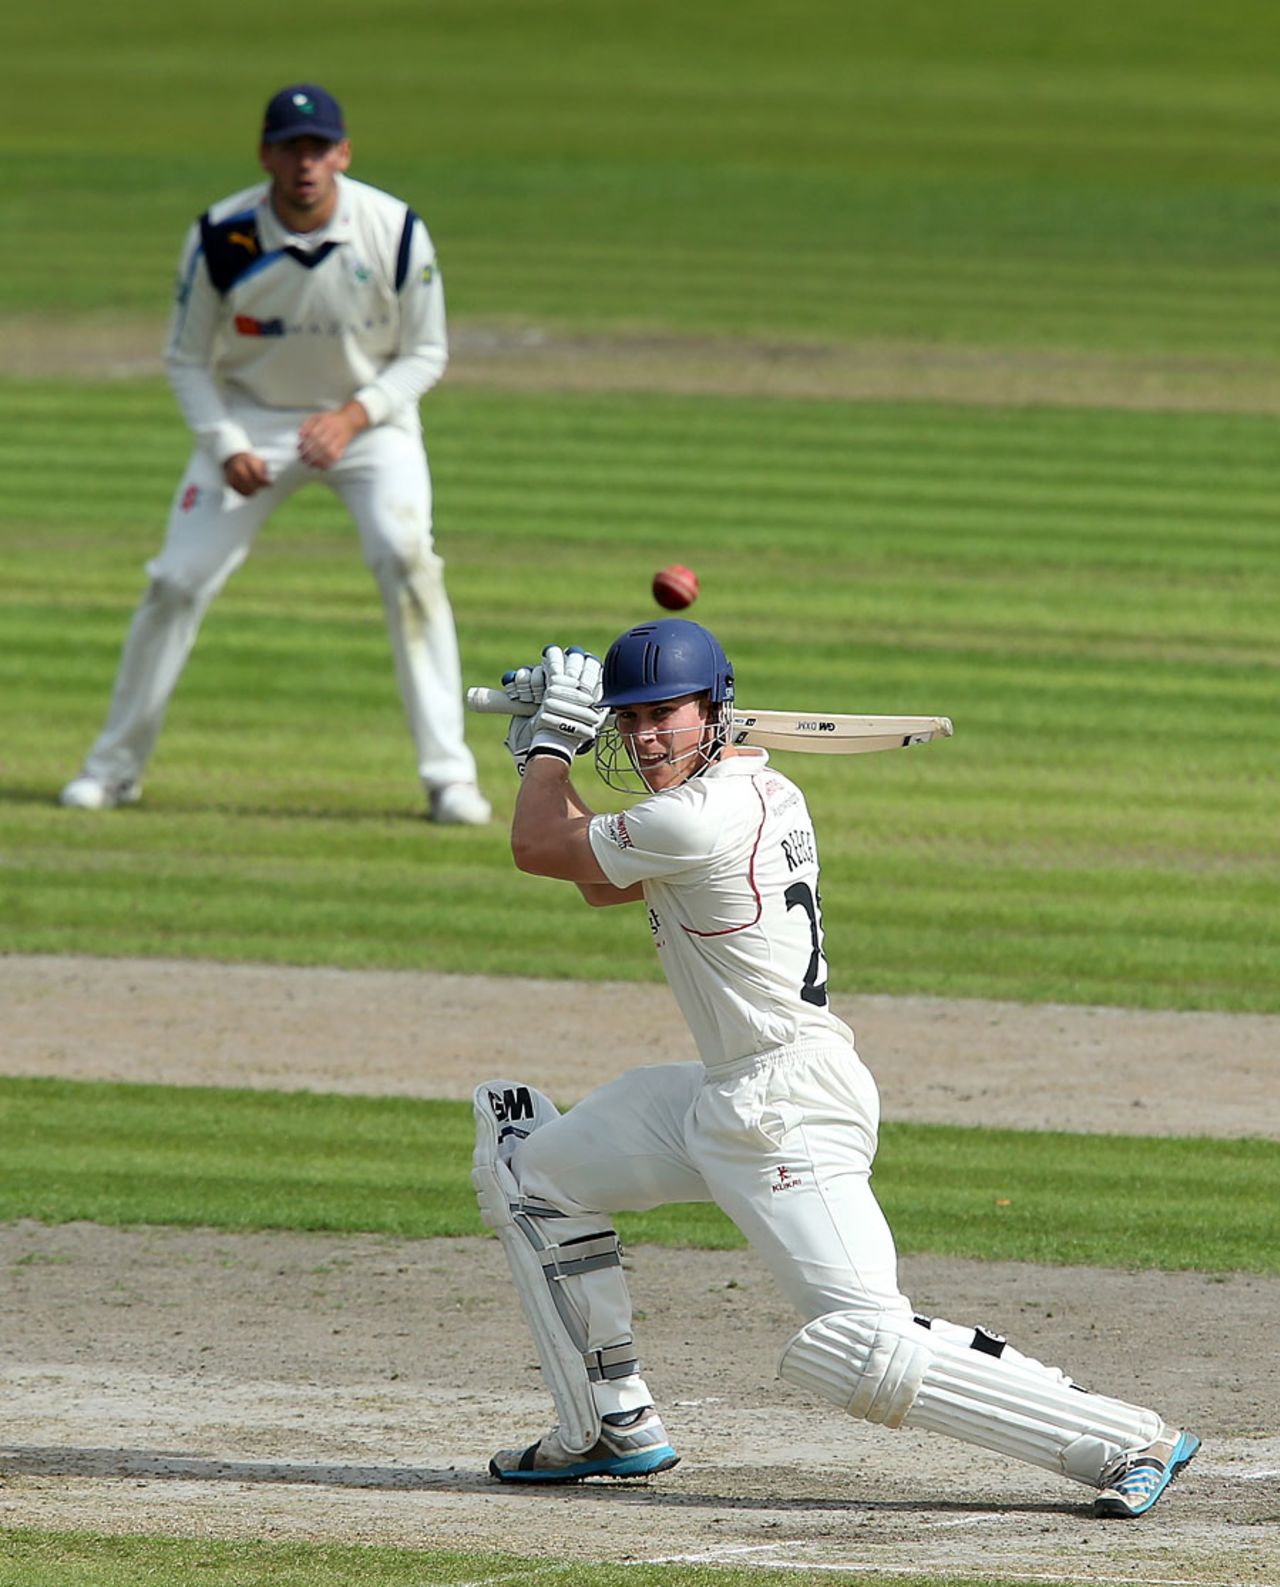 Luis Reece made a half-century to steady Lancashire, Lancashire v Yorkshire, County Championship, Division One, Old Trafford, August 31, 2014